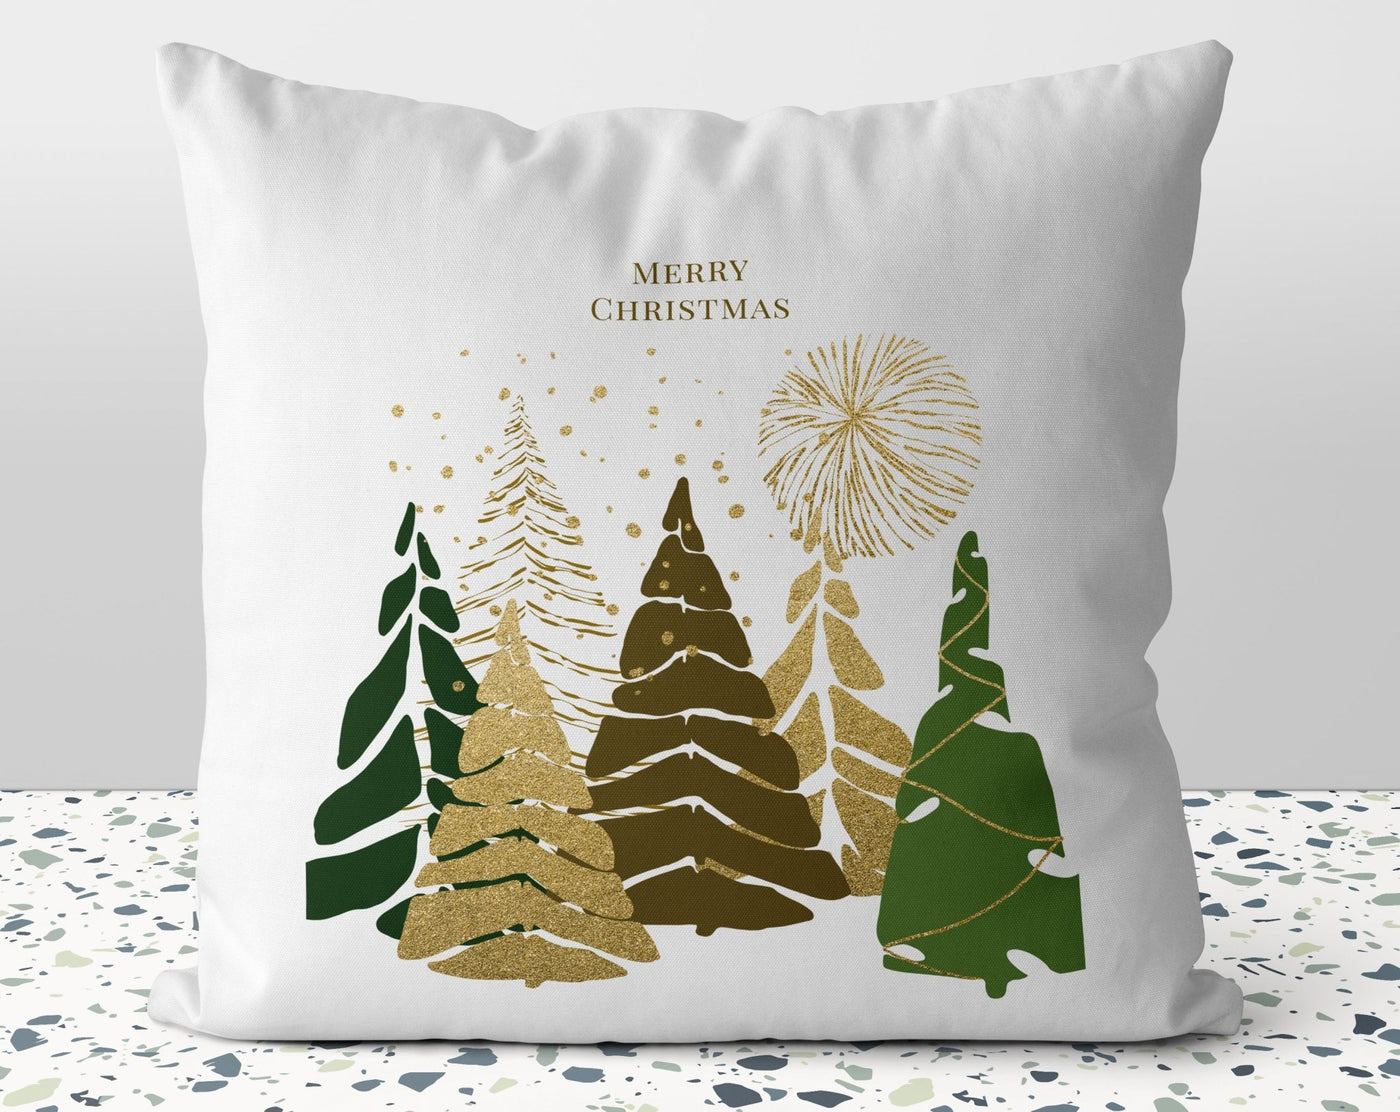 Christmas Elegant Trees Seasons Greetings White Green Gold Square Pillow with Cover Throw with Insert - Cush Potato Pillows